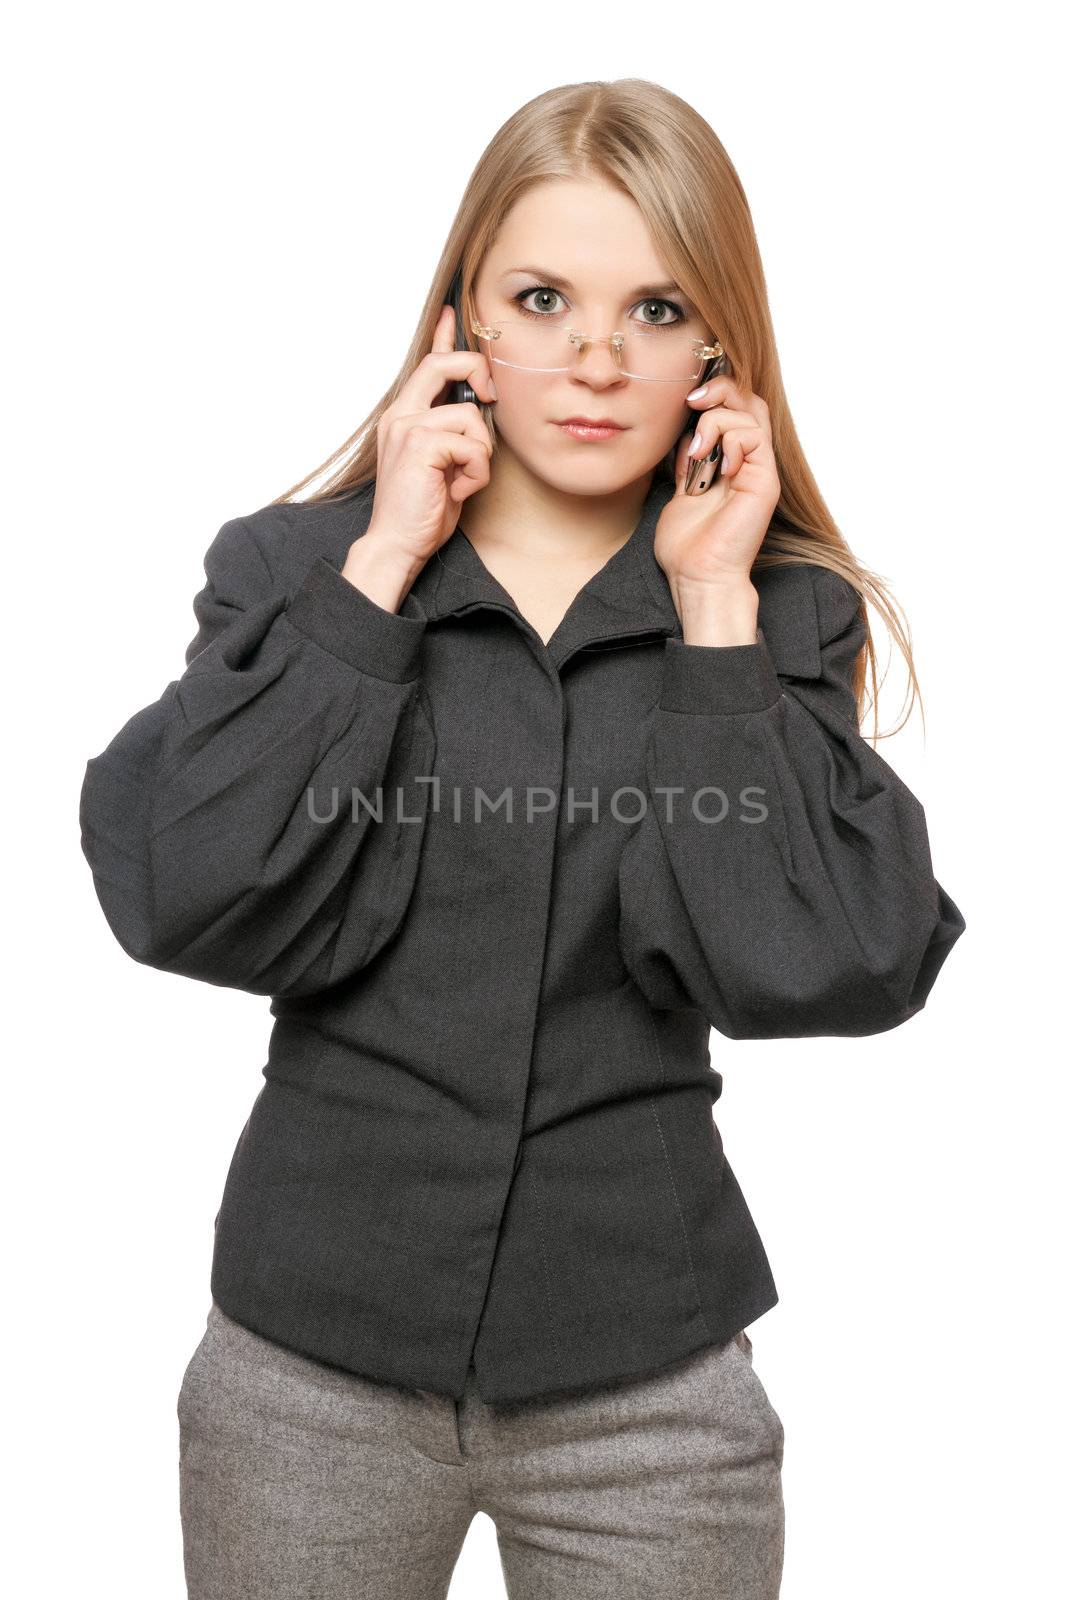 Portrait of serious young blonde in a gray business suit with two phones